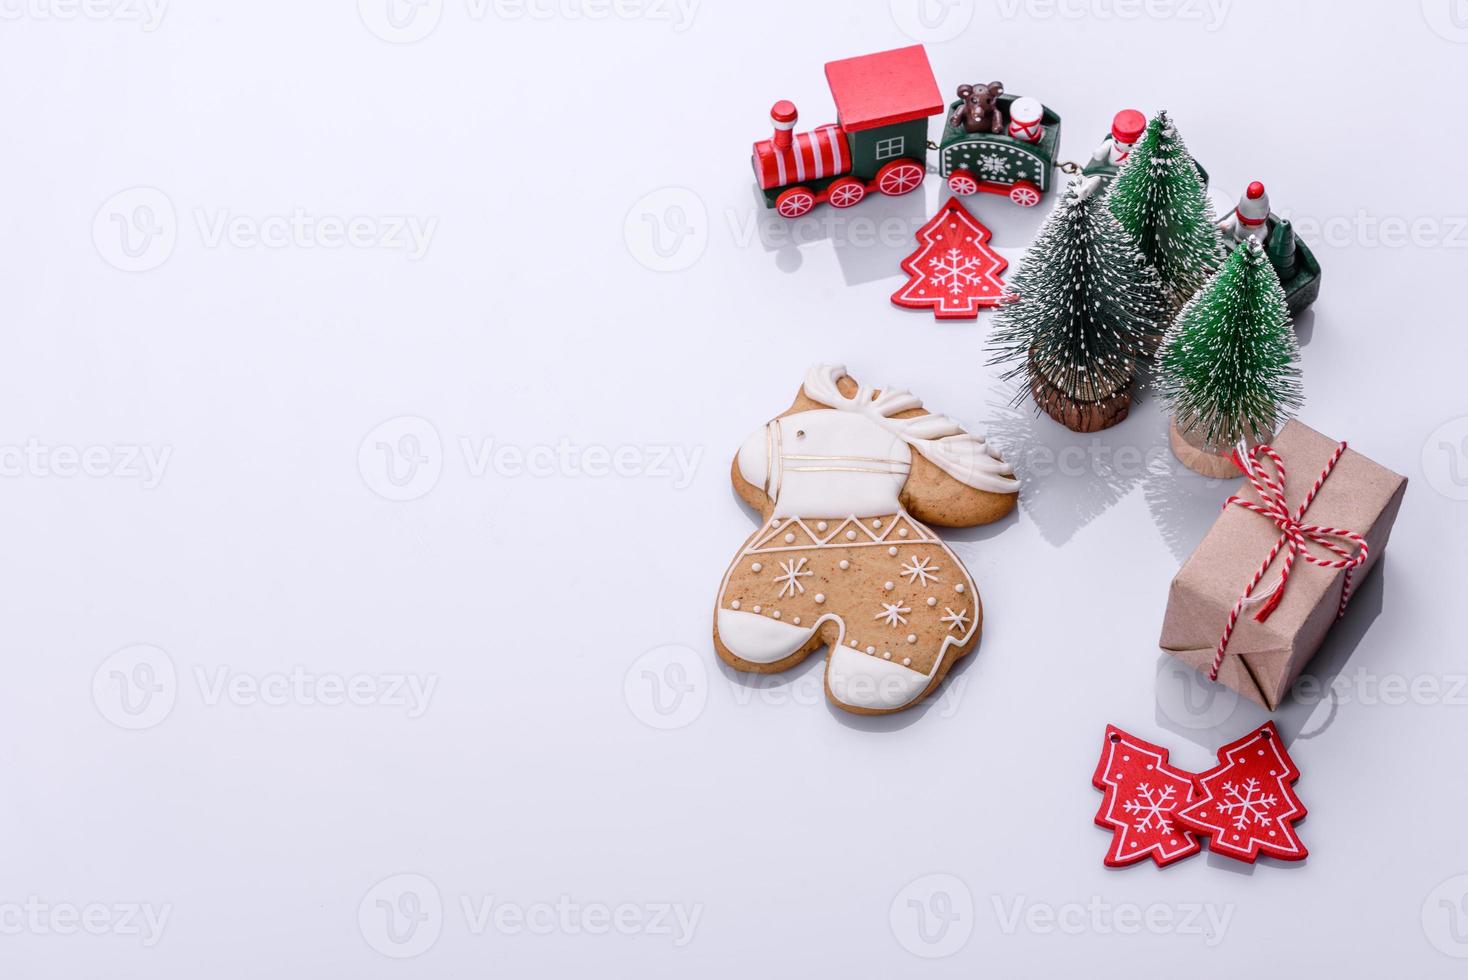 Elements of Christmas scenery, toys, gingerbread and other Christmas tree decorations photo